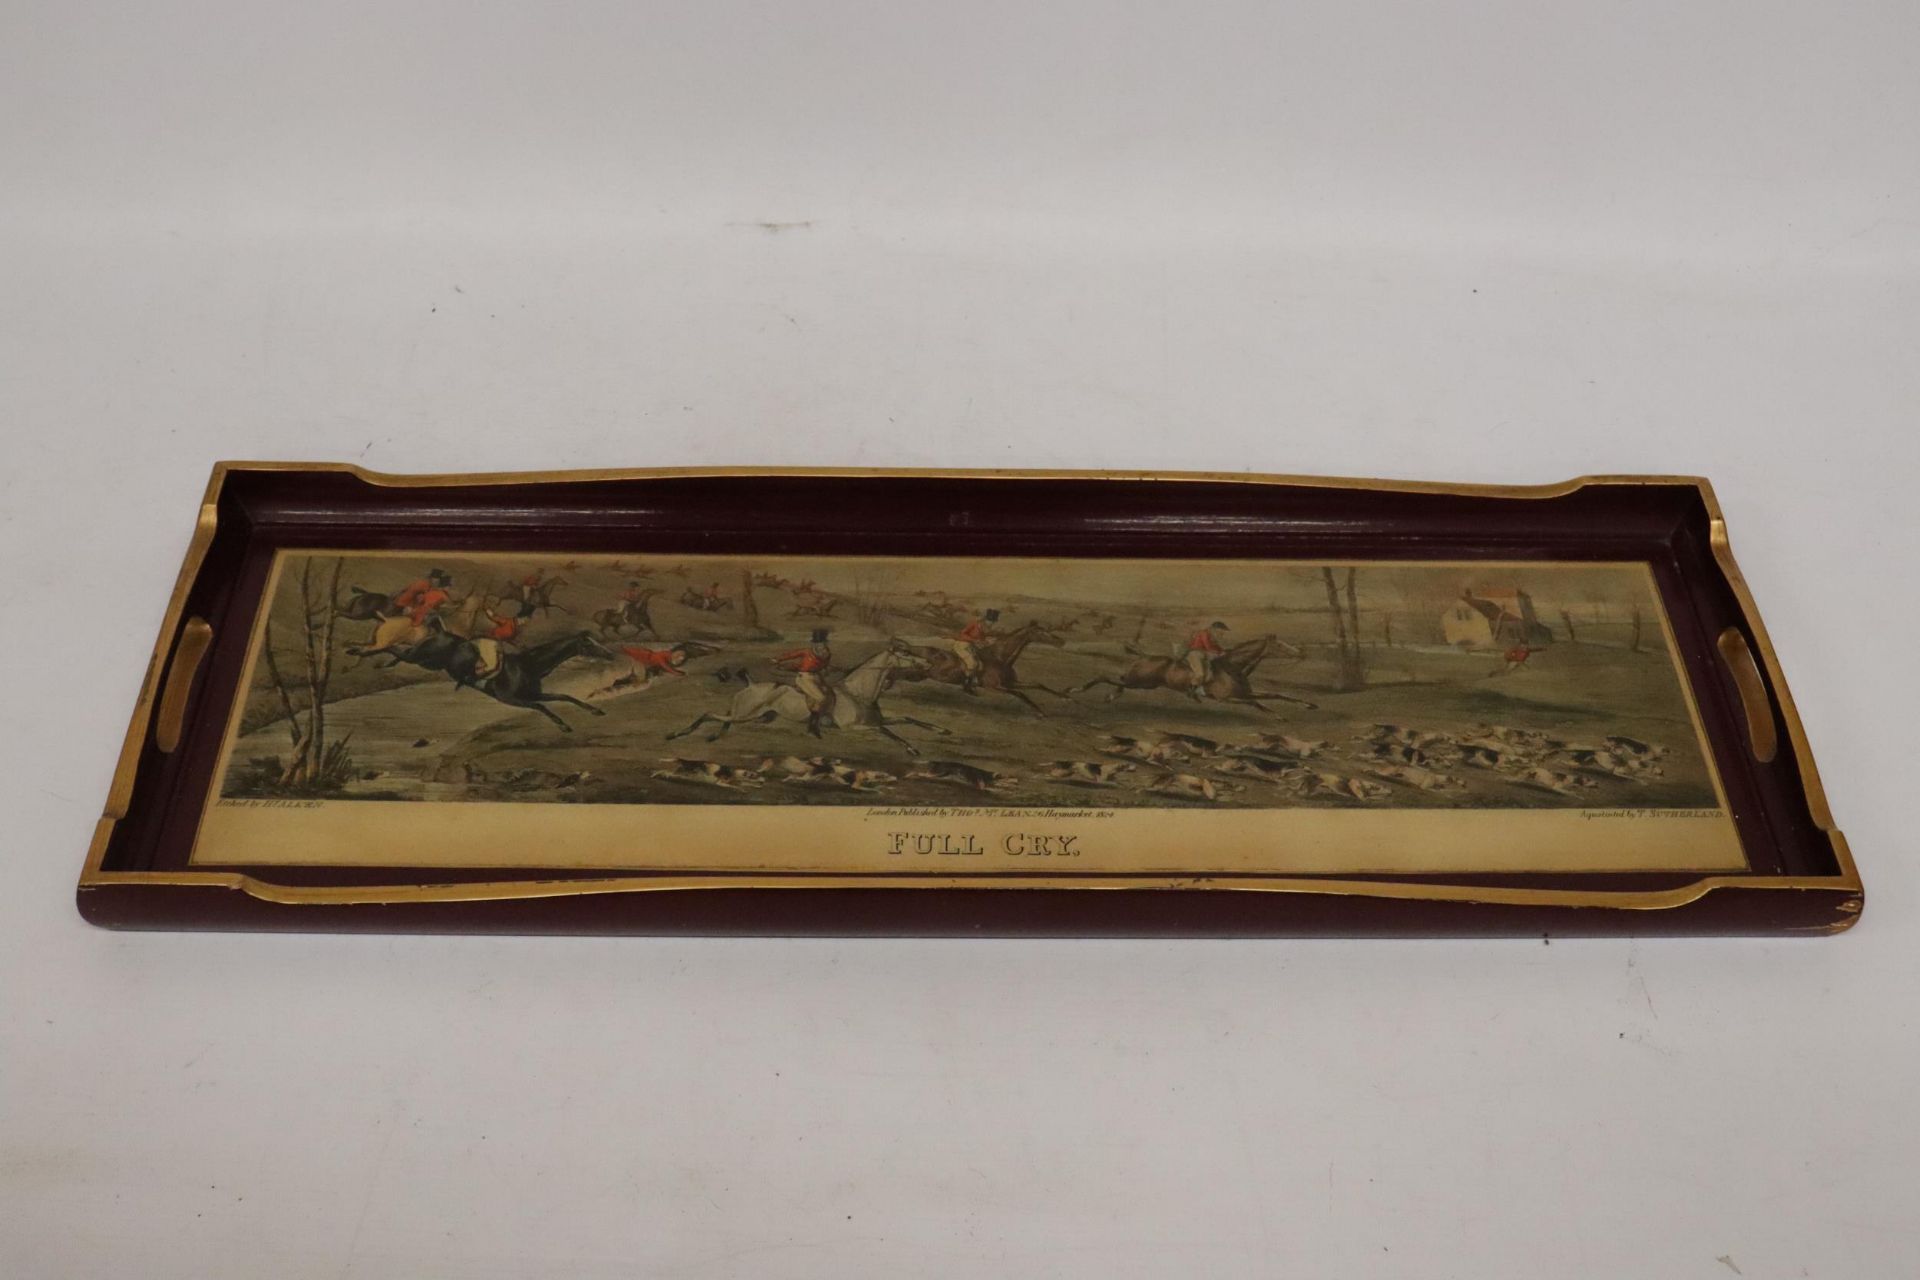 AN OBLONG LACQUERED TRAY ENTITLED "FULL CRY" HUNTING SCENE - 67.5 X 23CM